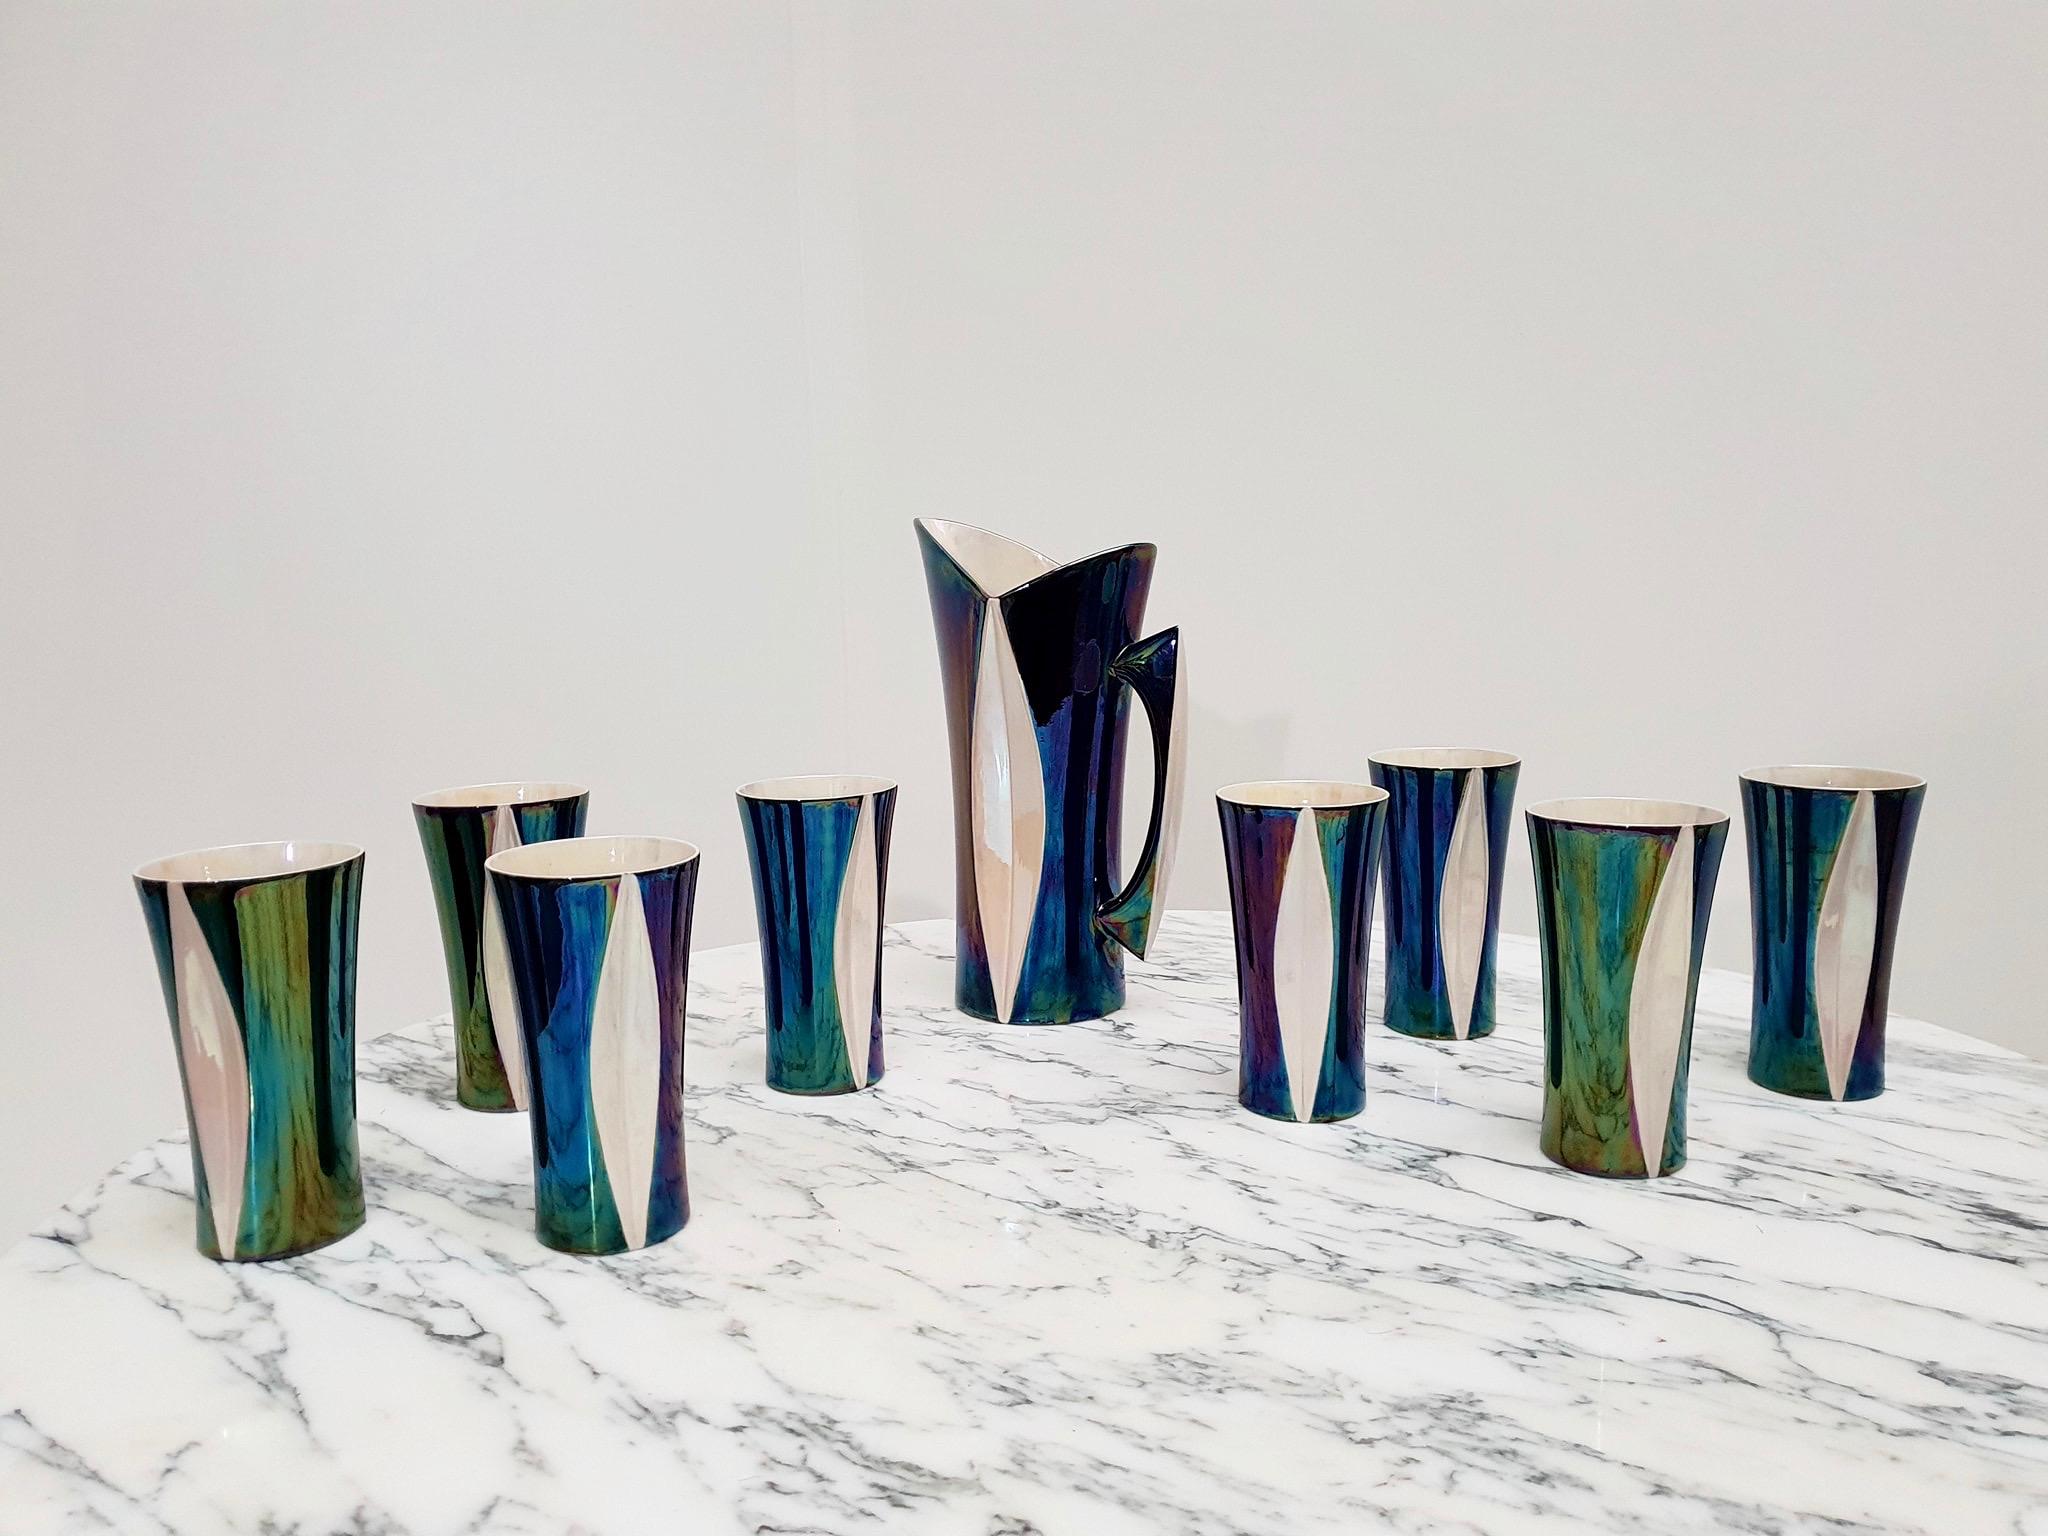 Mid-20th Century Iridescent Ceramic Drinks Set of 9 Made in France, 1970s For Sale 3